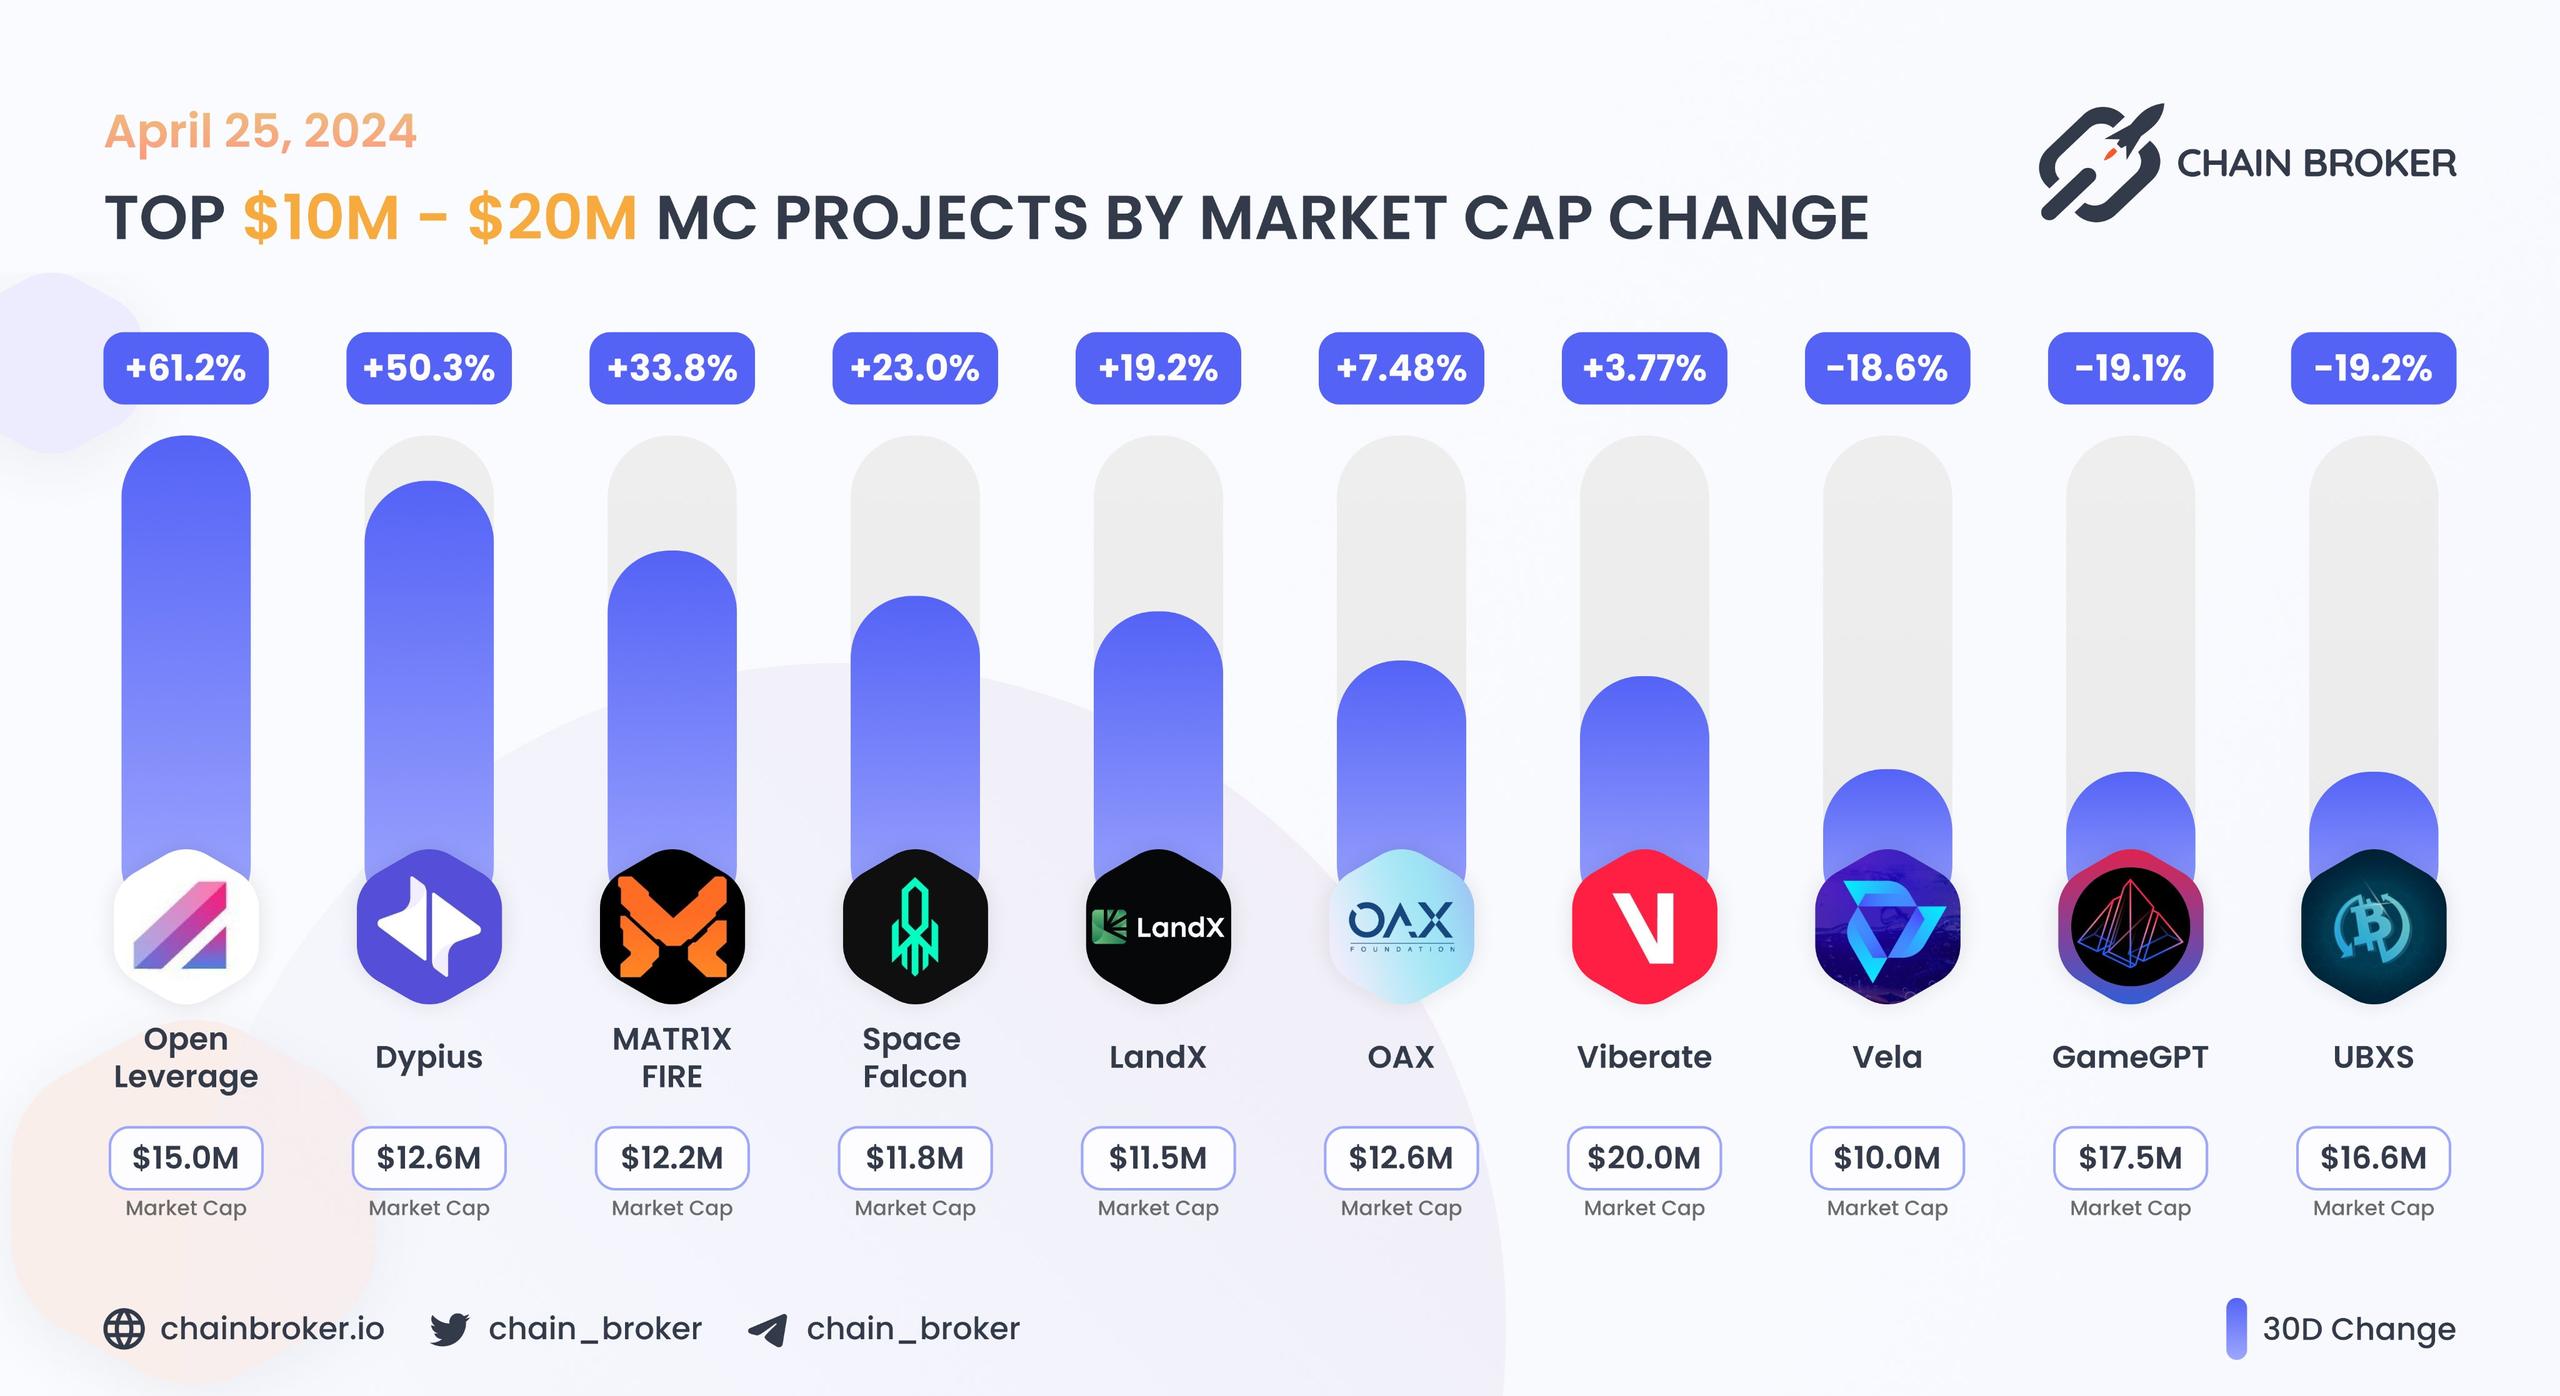 Top projects with Market Cap $10M - $20M